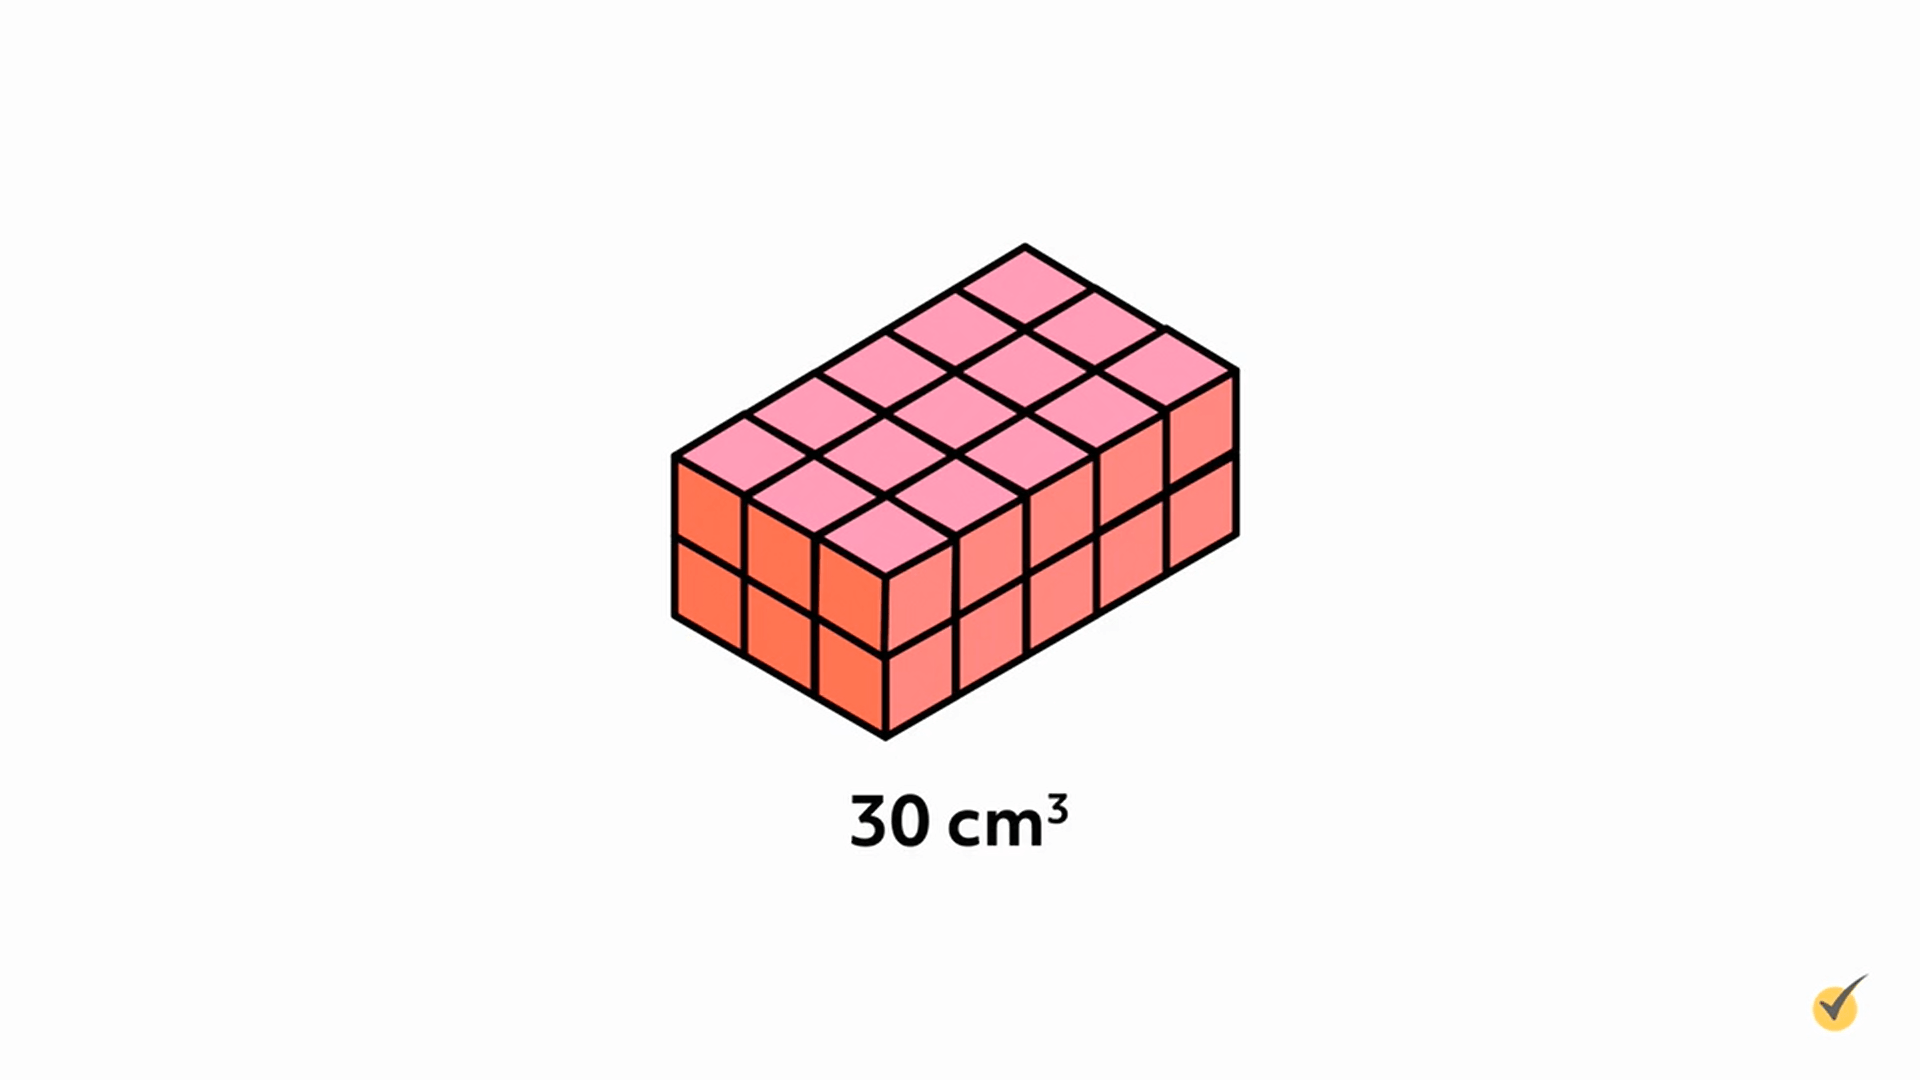 Image of 30 cm cubed rectangle.